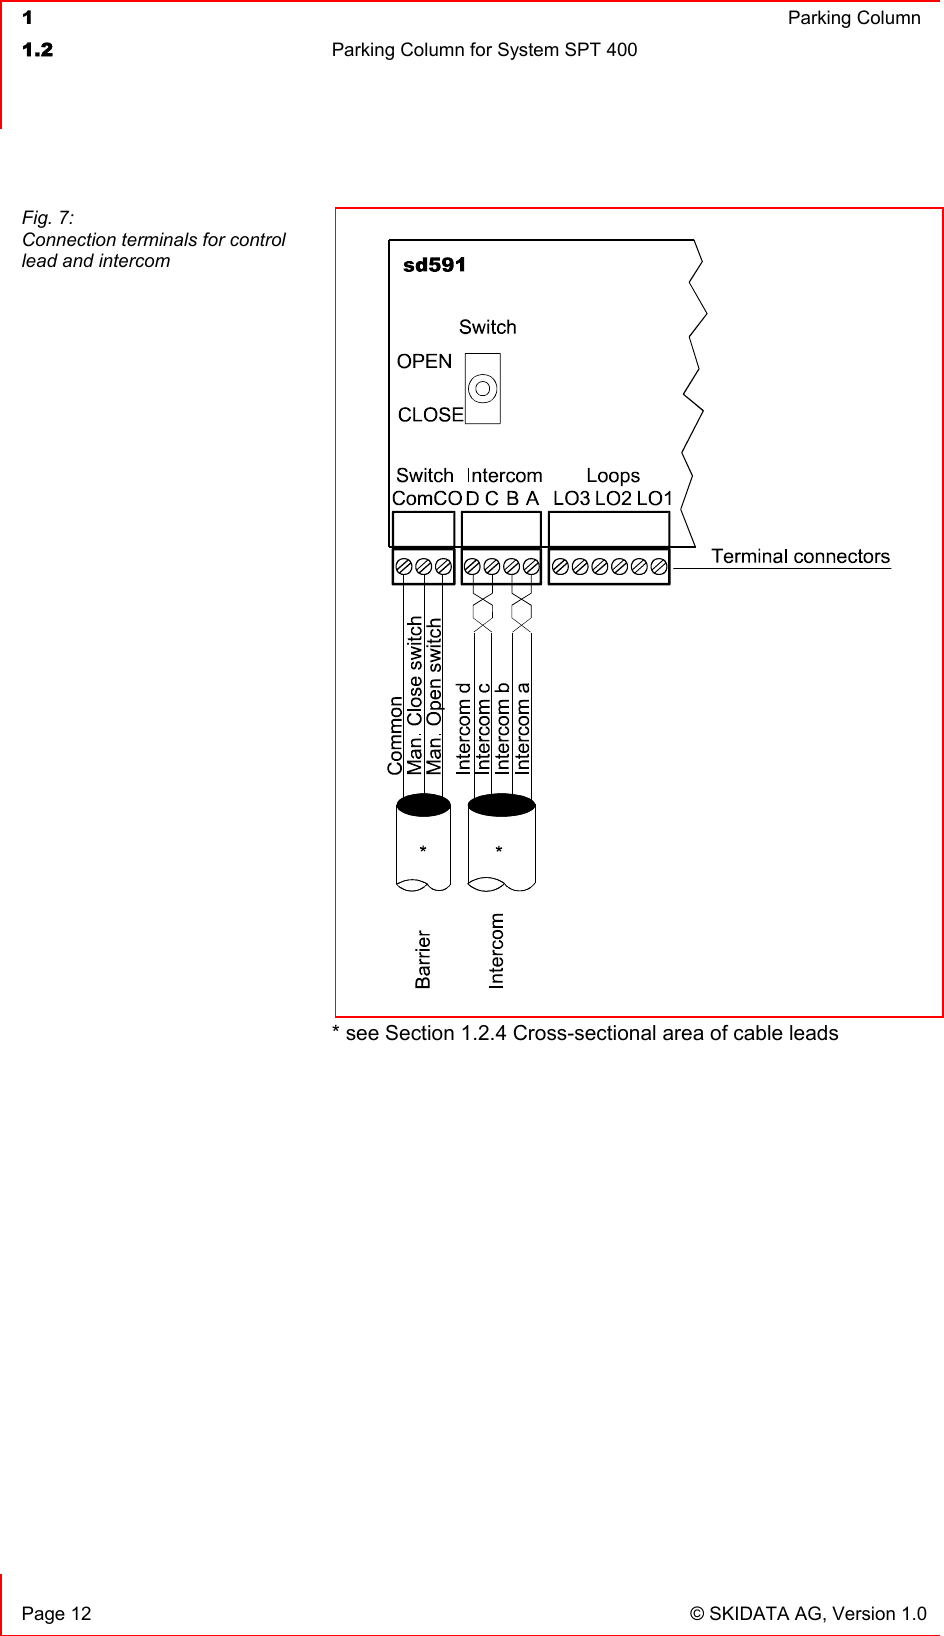  1  Parking Column1.2  Parking Column for System SPT 400   Page 12  © SKIDATA AG, Version 1.0 * see Section 1.2.4 Cross-sectional area of cable leads Fig. 7: Connection terminals for control lead and intercom